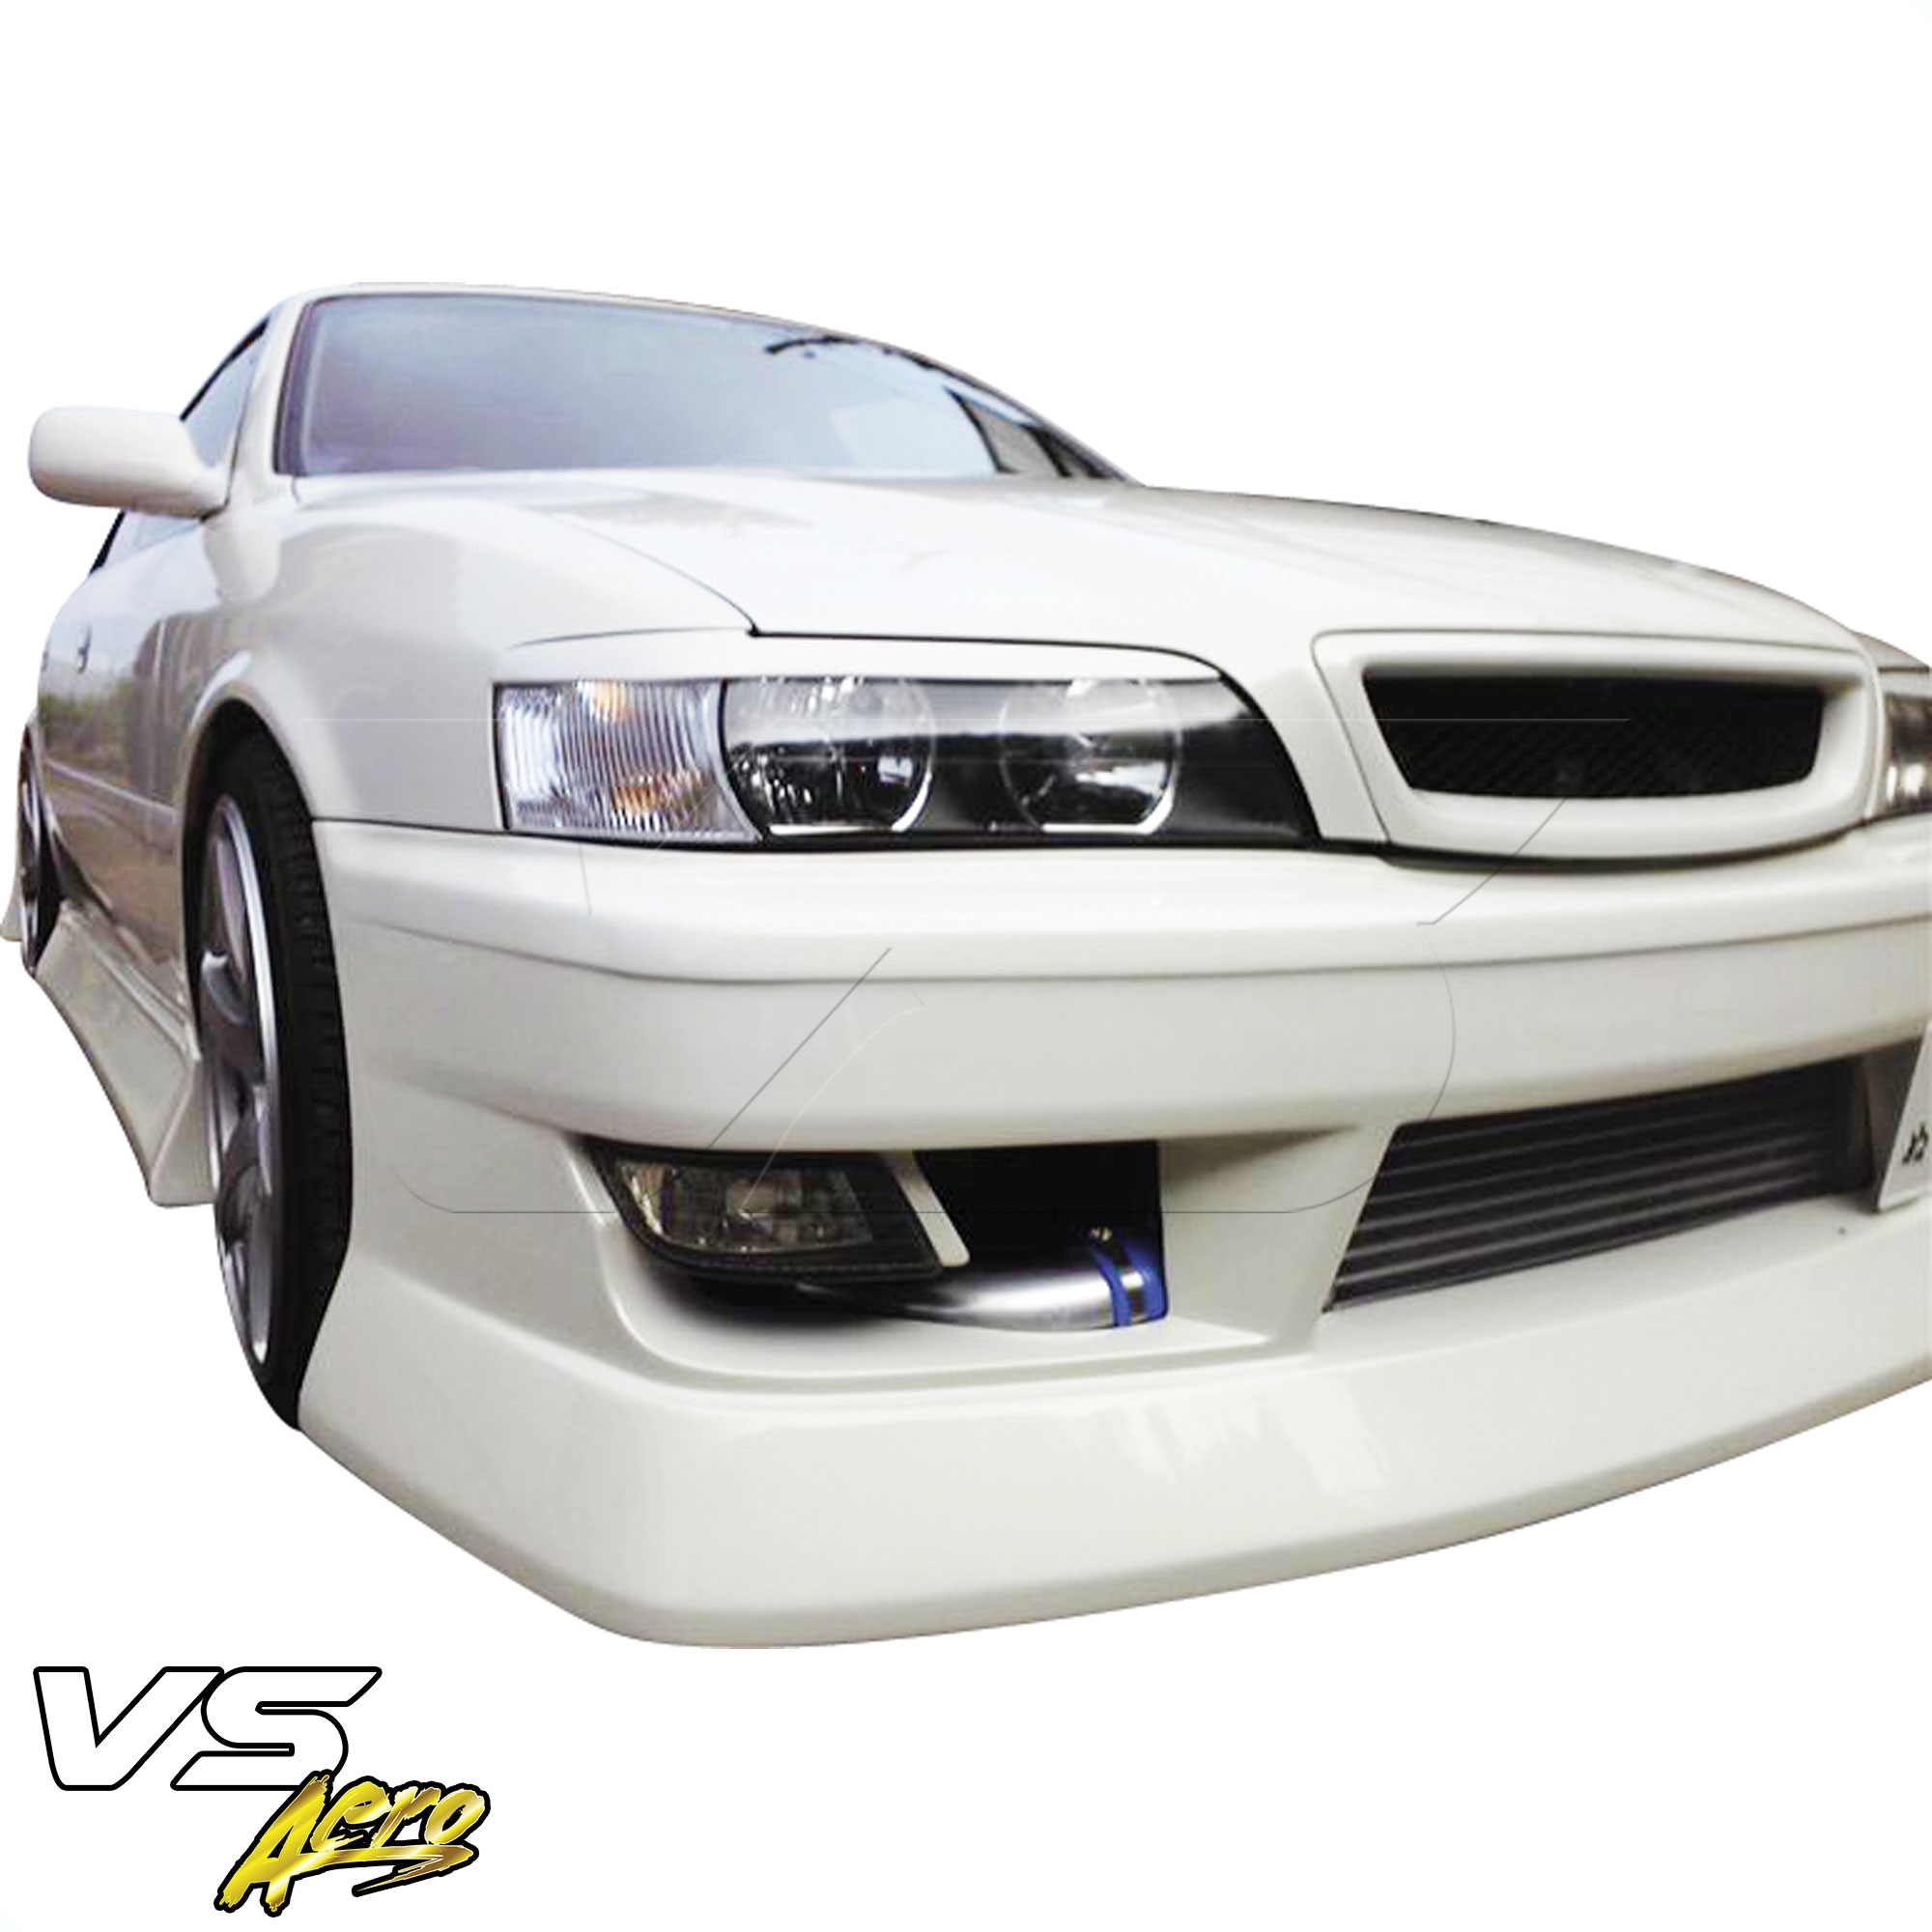 VSaero FRP BSPO Front Bumper > Toyota Chaser JZX100 1996-2000 - Image 3